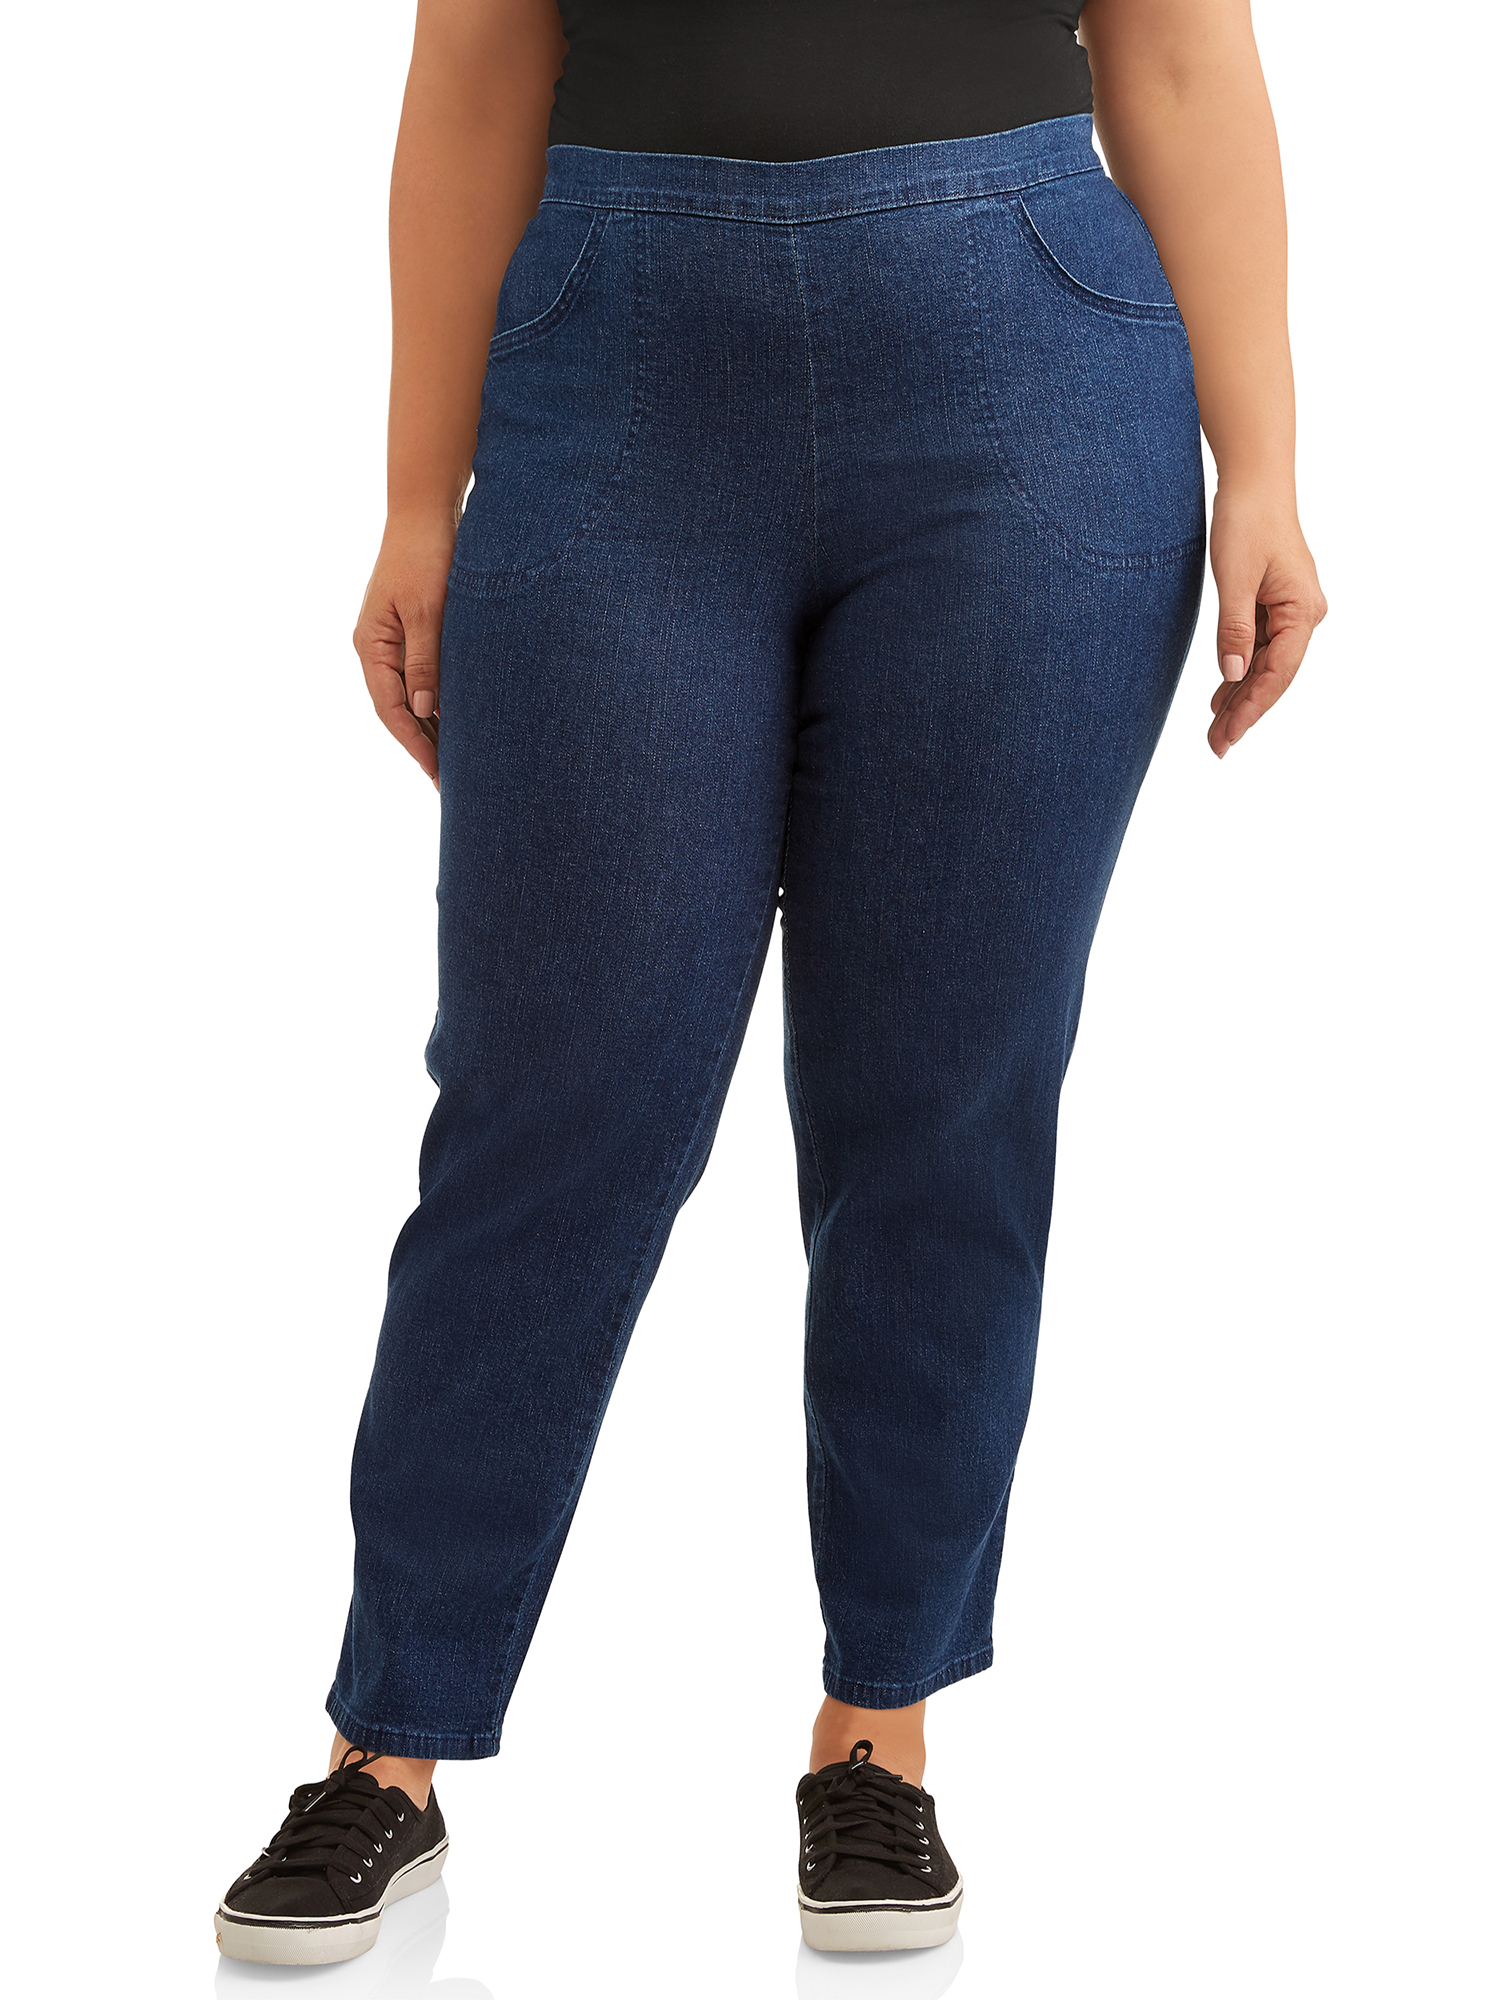 Just My Size Women's Plus Size 2 Pocket Pull On Pant, 2-Pack - image 2 of 8